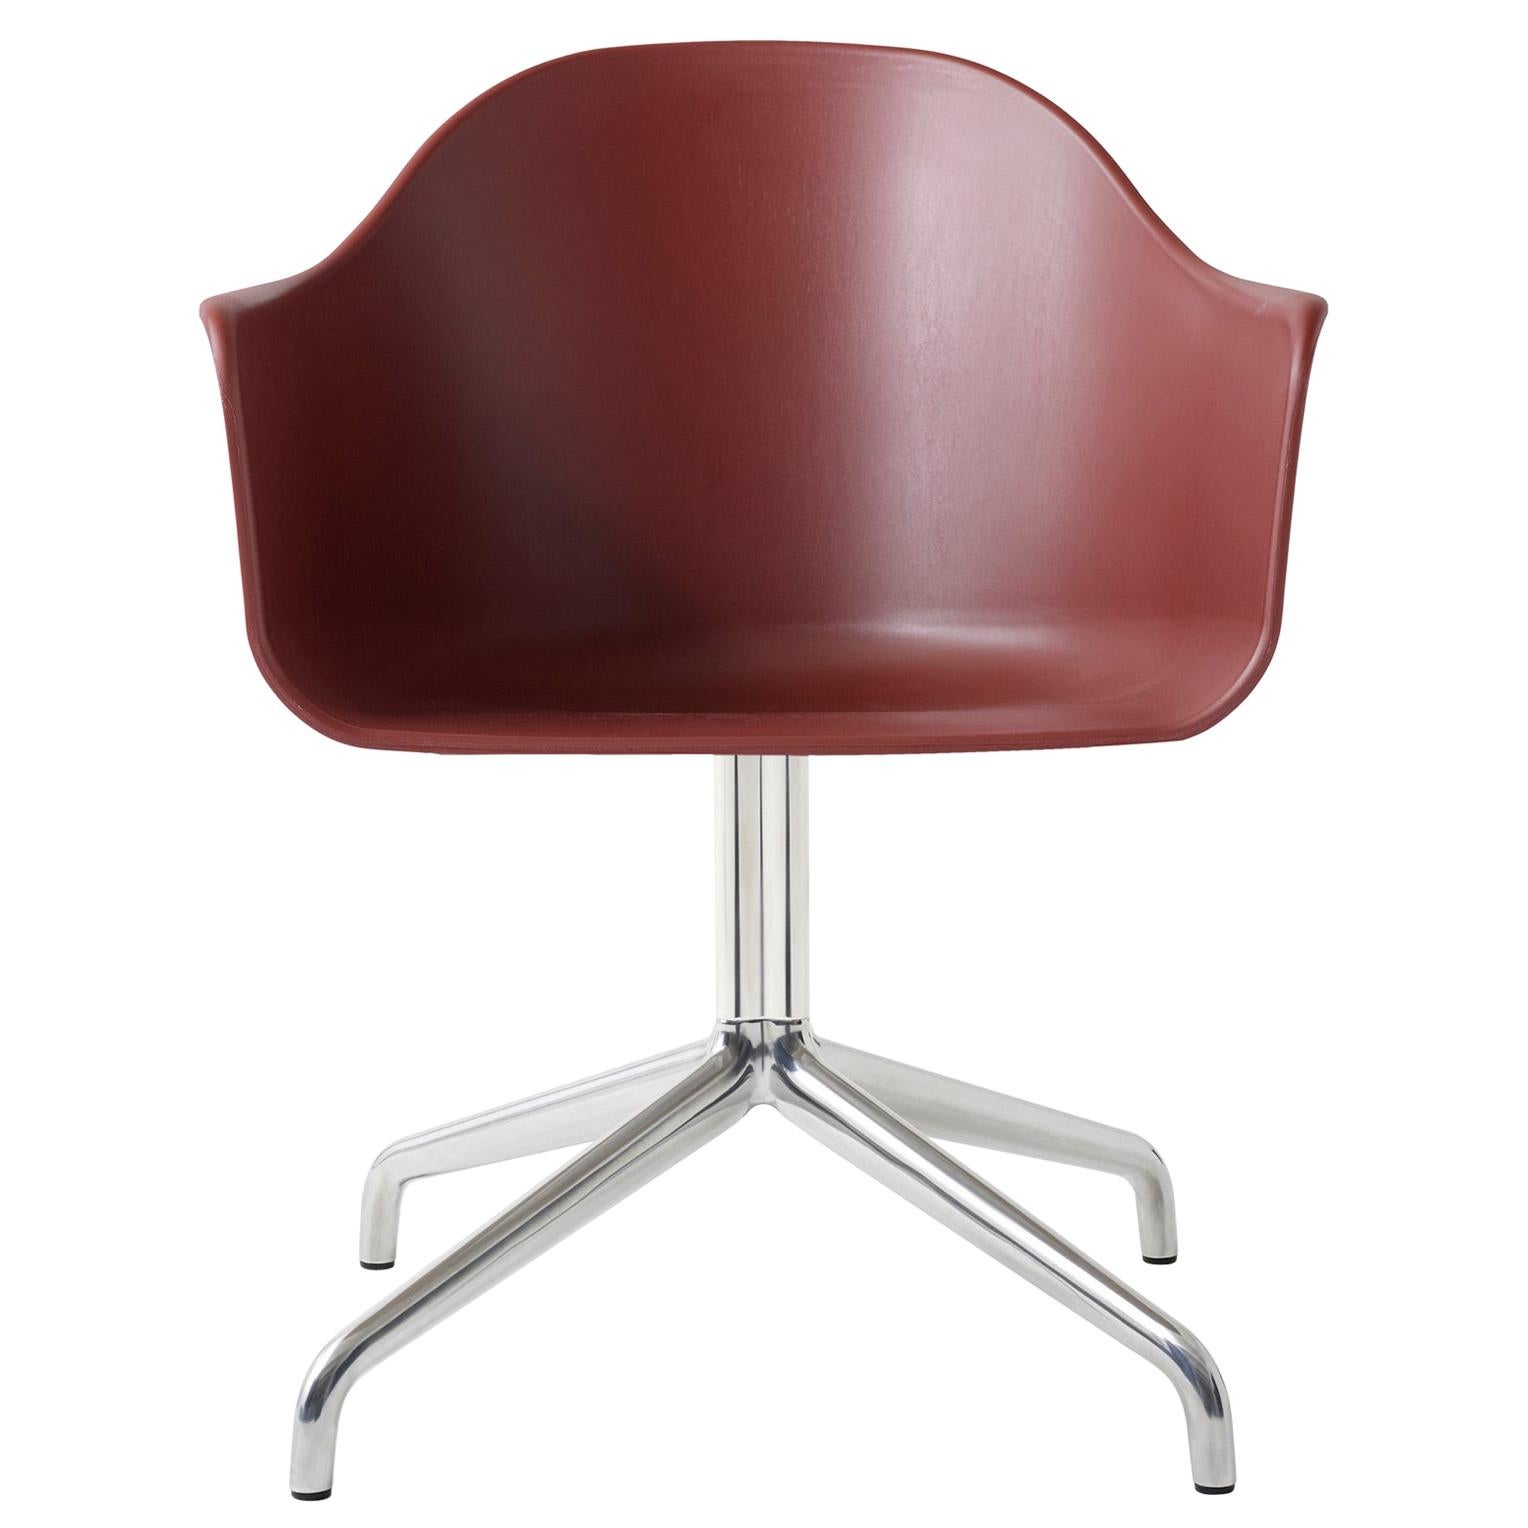 Harbour Chair, Swivel Base in Polished Aluminum, Burning Red Shell For Sale